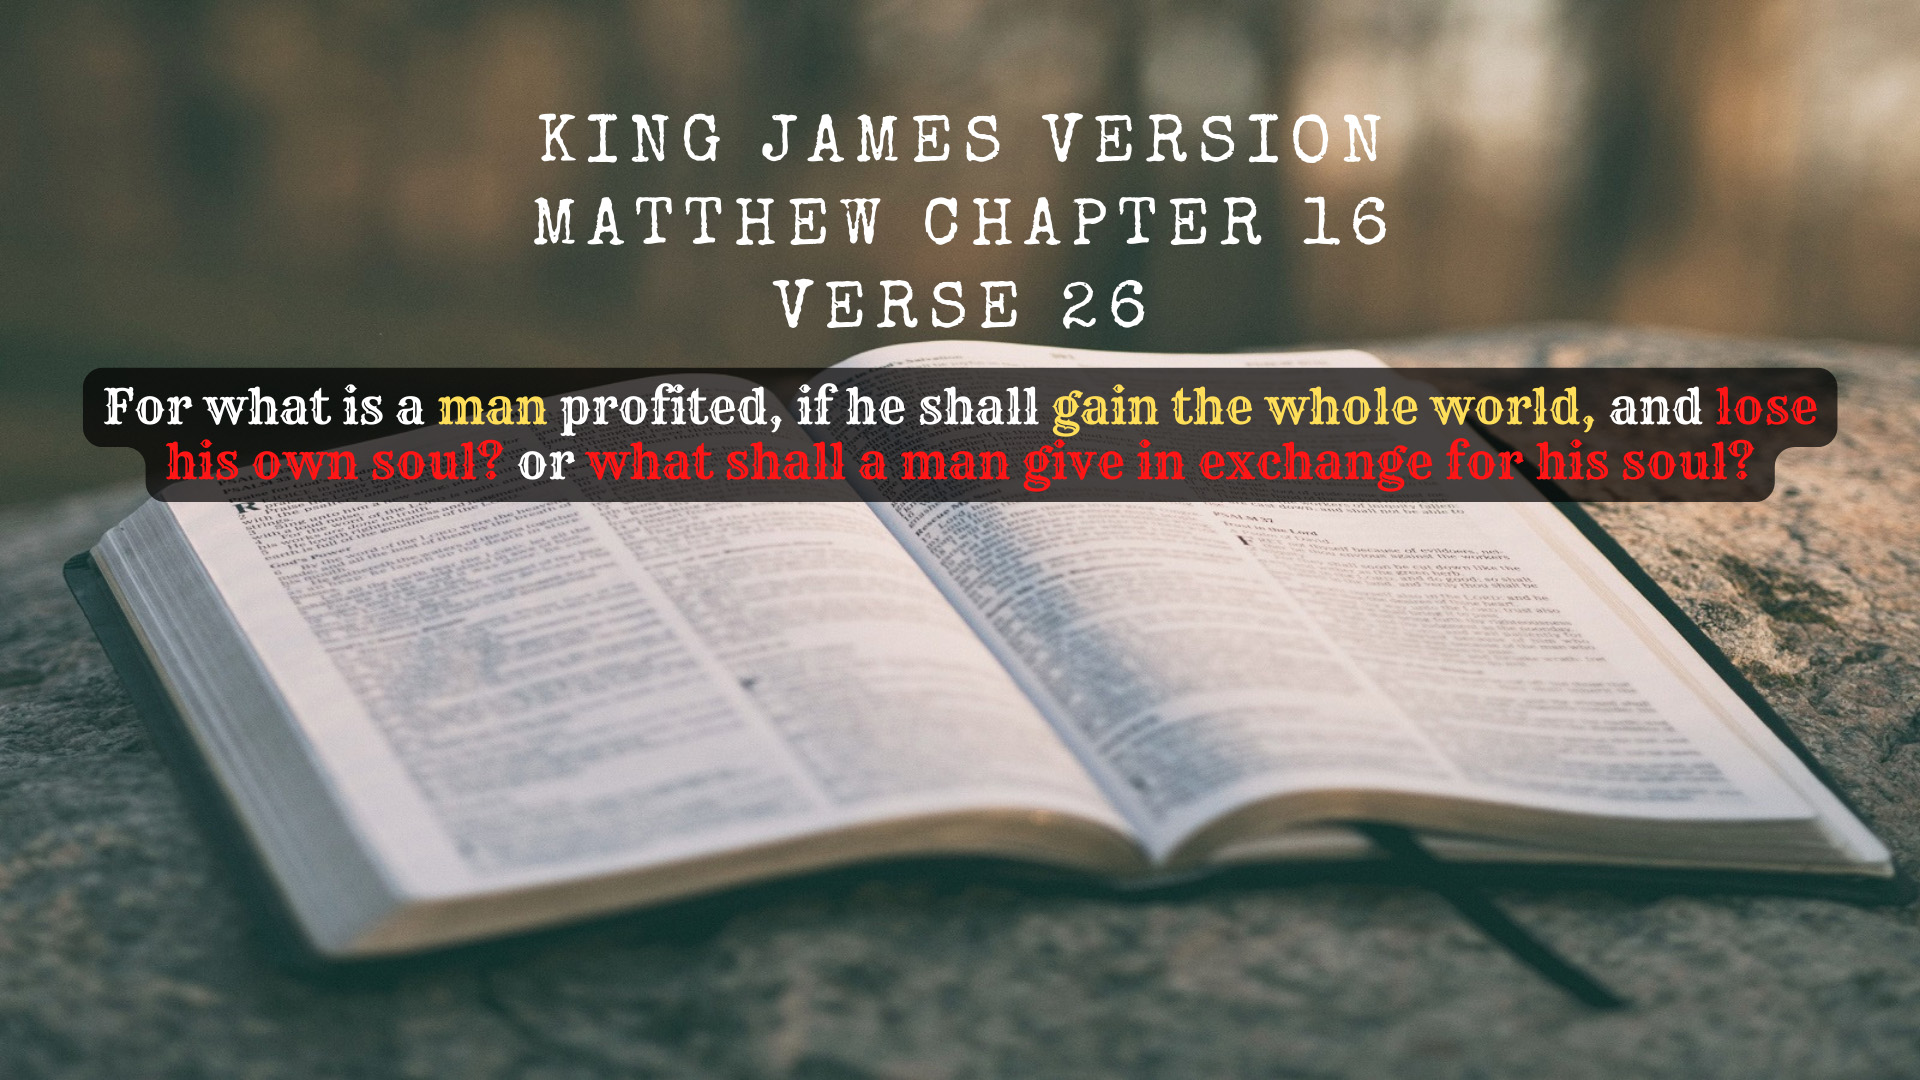 King James Holy Bible Matthew Chapter 16 Verse 26 For what is a man profited, if he shall gain the whole world, and lose his own soul or what shall a man give in exchange for his soul